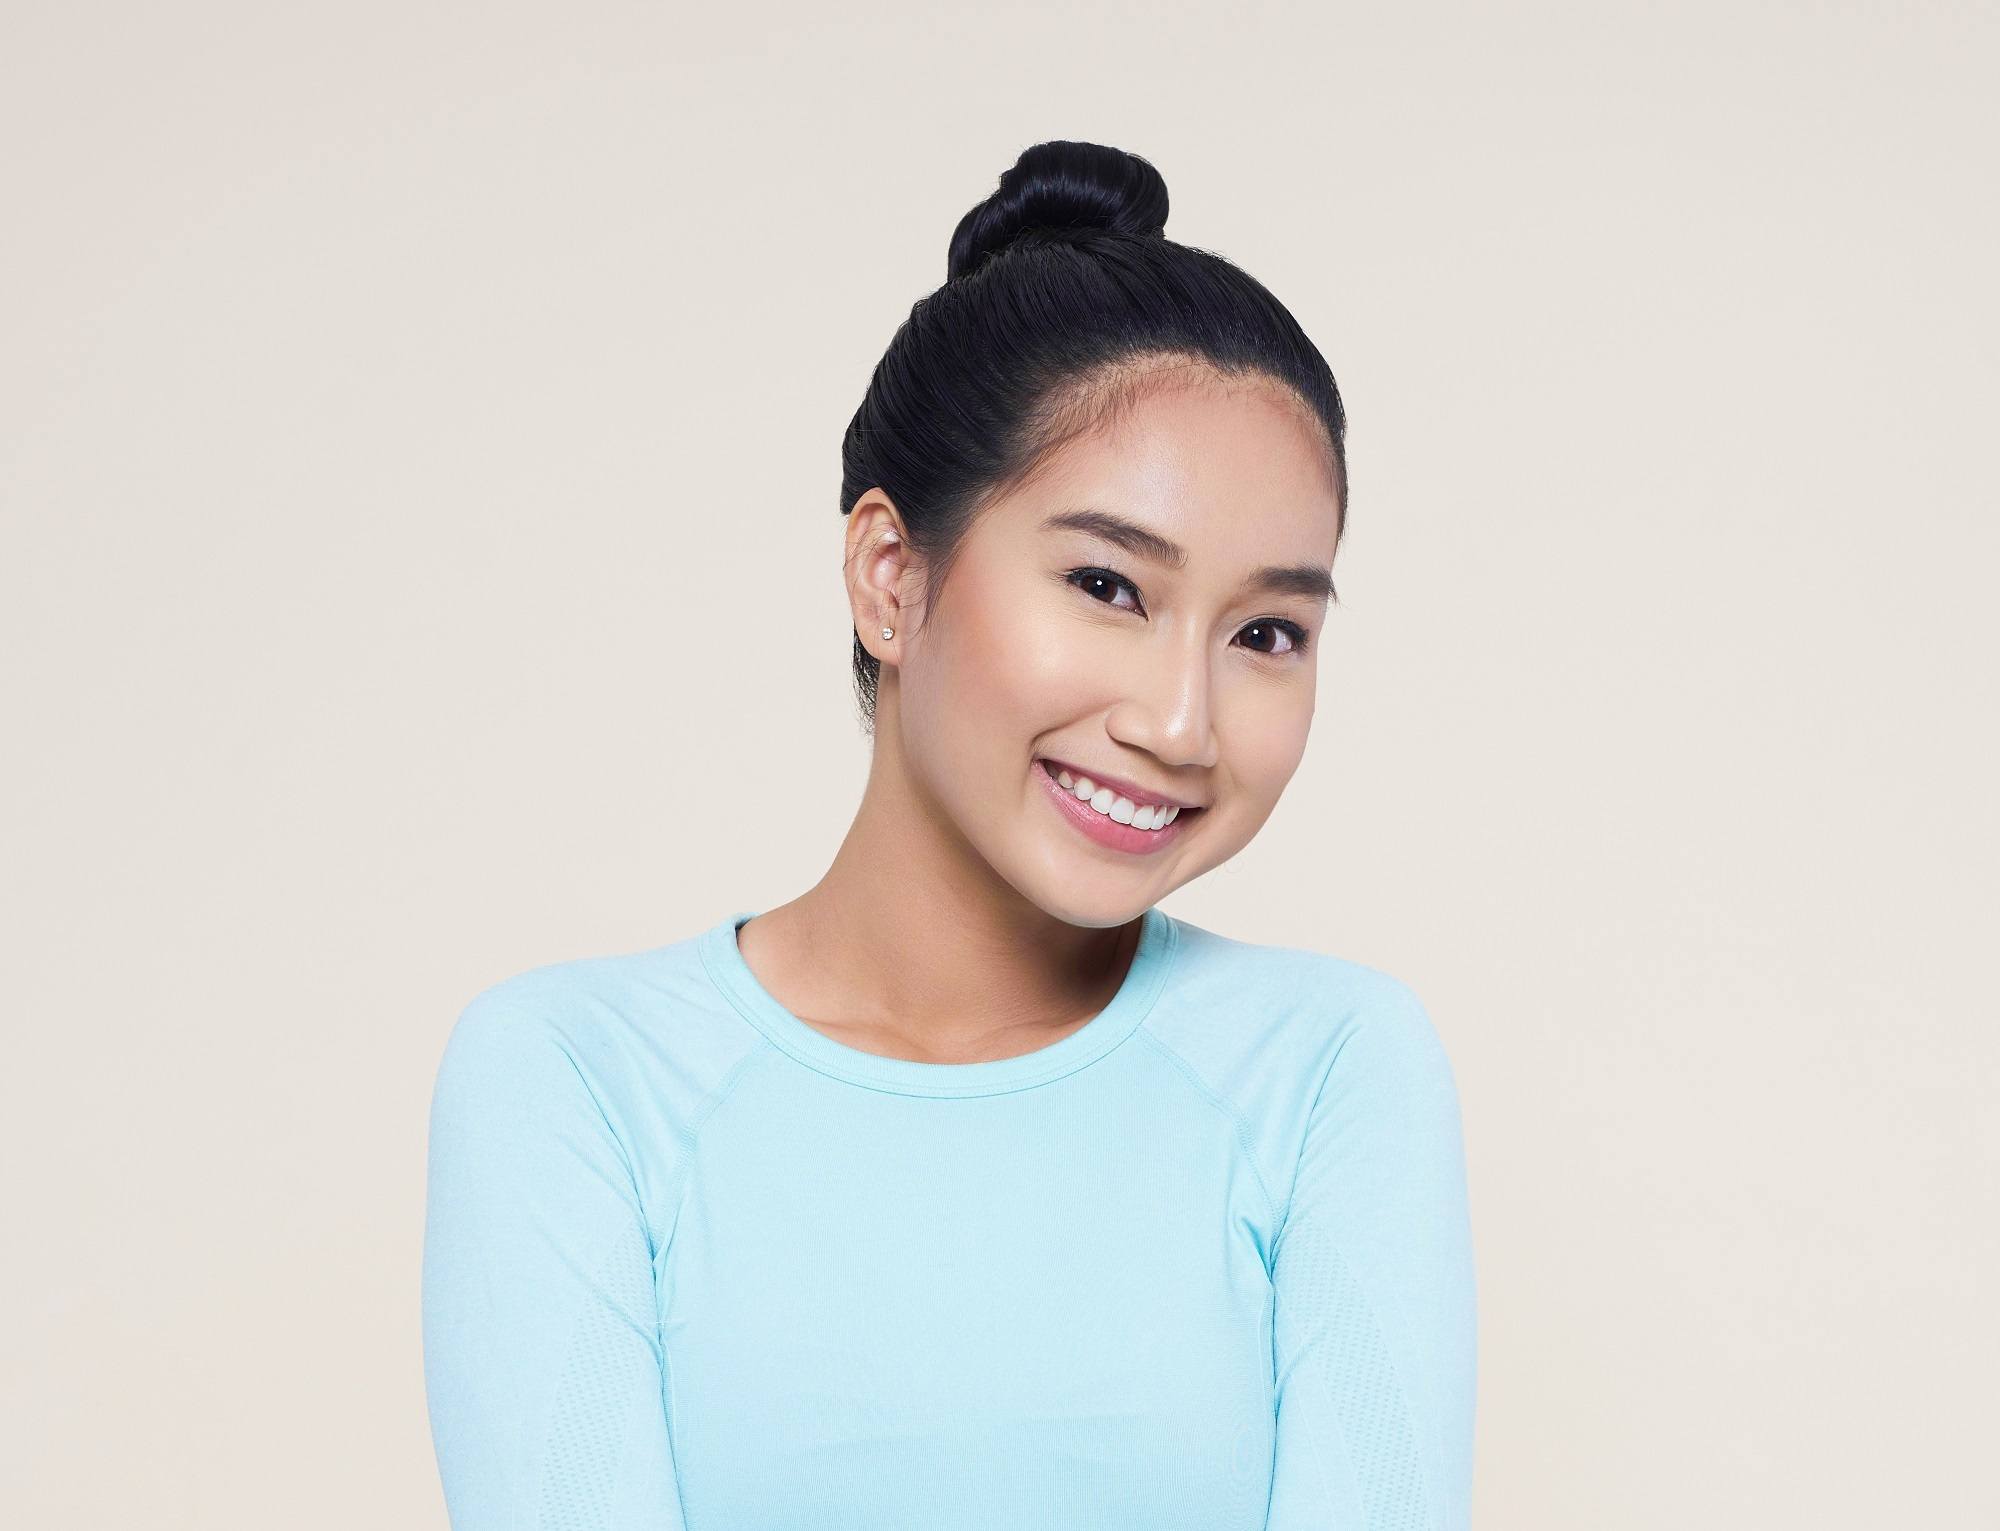 Advent calendar: Closeup shot of an Asian woman with long black hair in a bun wearing light blue shit against an oyster-colored background